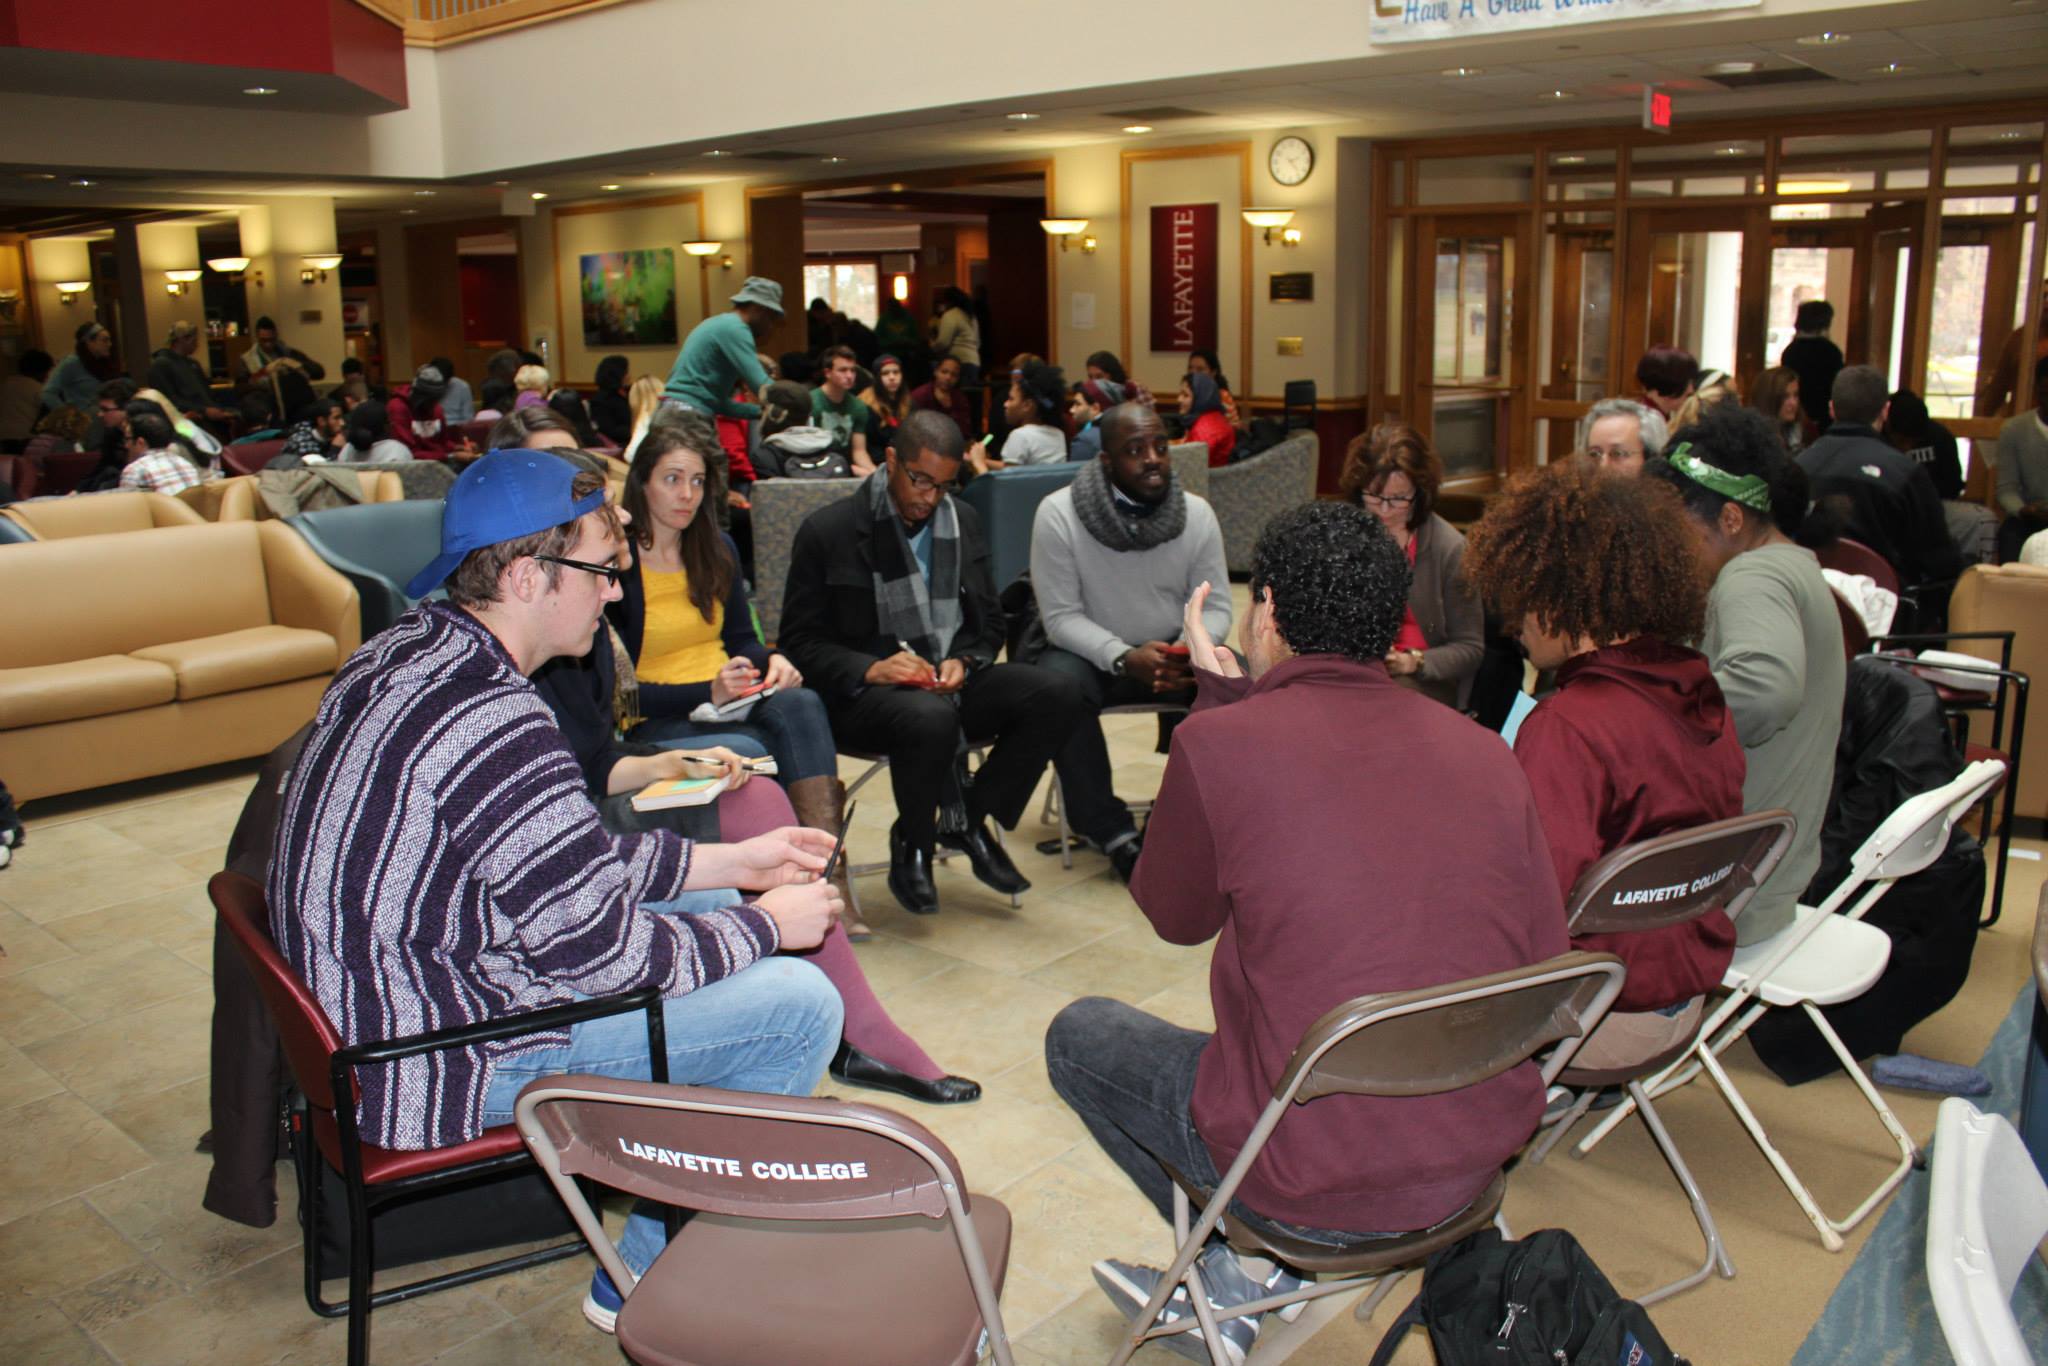 Students, faculty, administrators, staff and residents of Easton discuss spoke about personal experiences and national issues in groups.